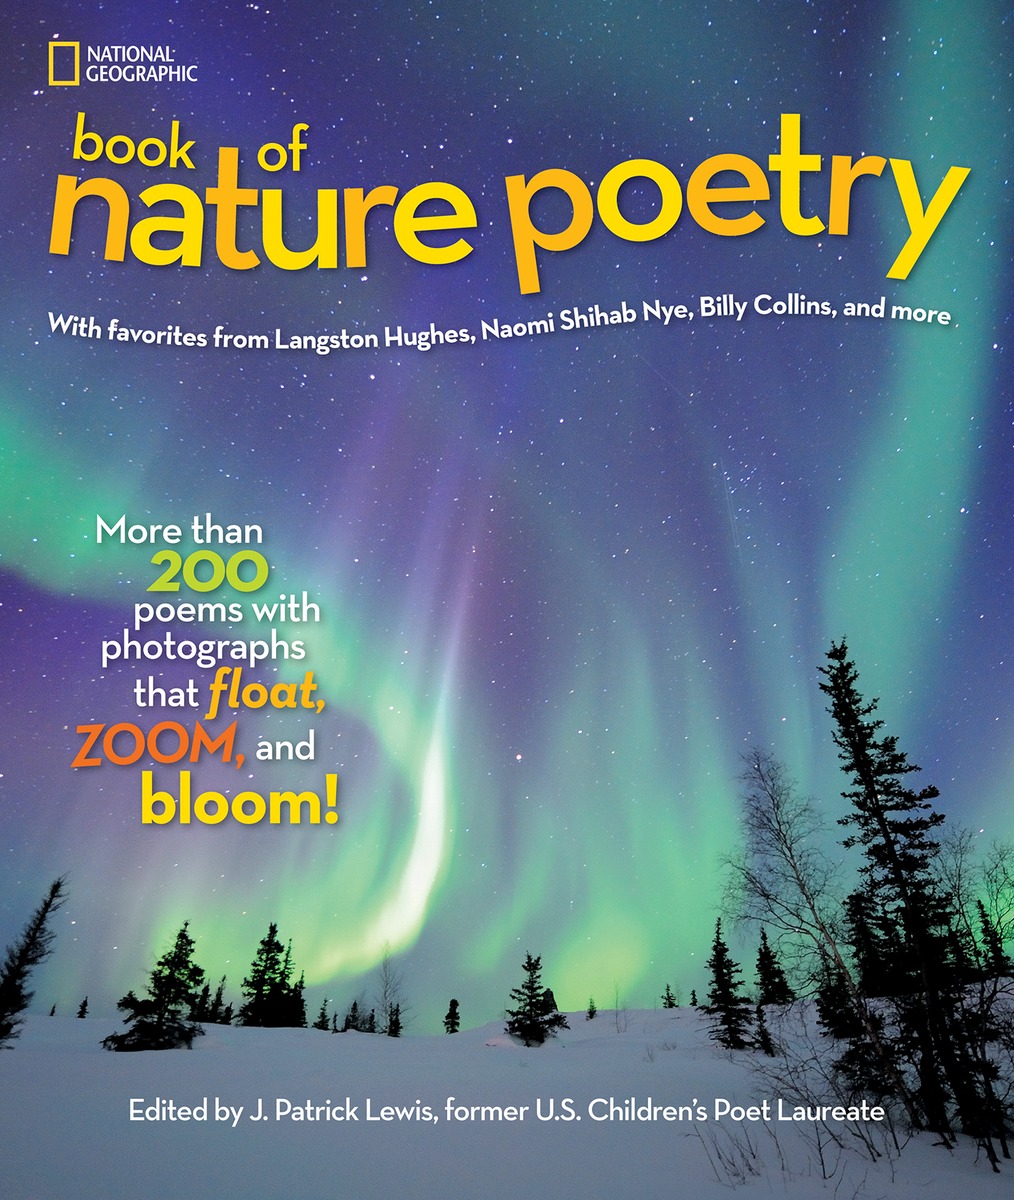 NG BOOK OF NATURE POETRY